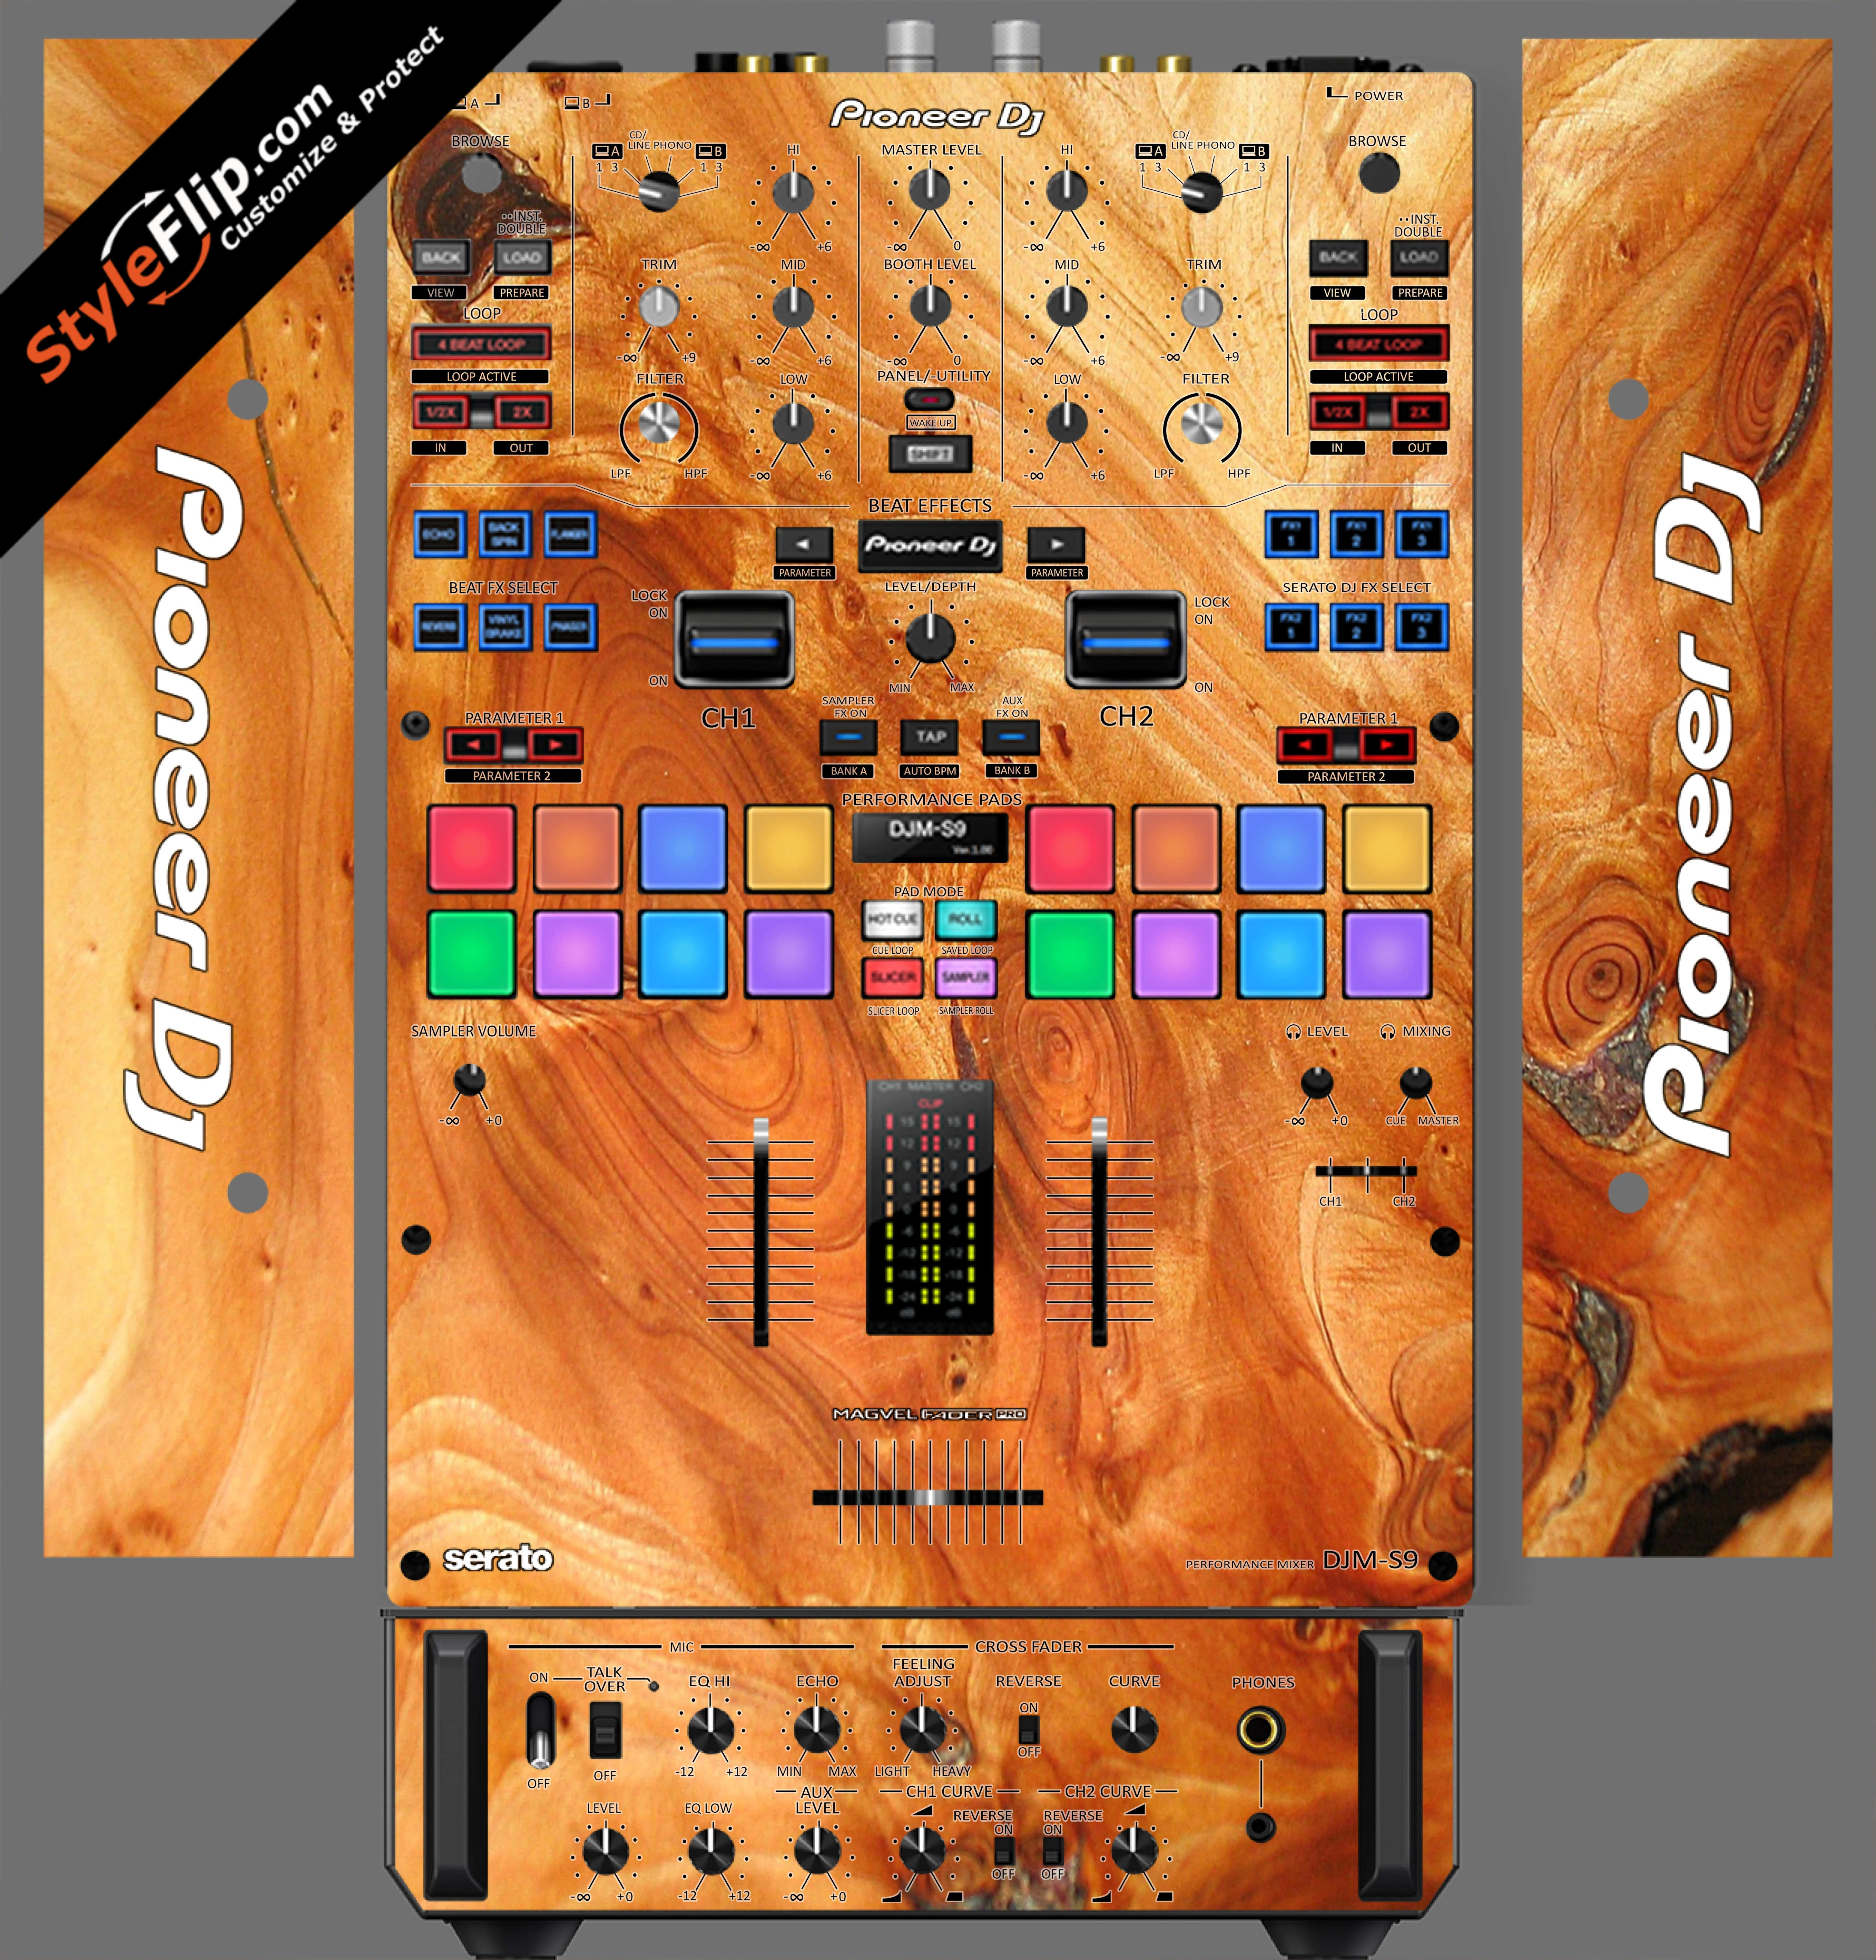 Stained Wood Pioneer DJM S9